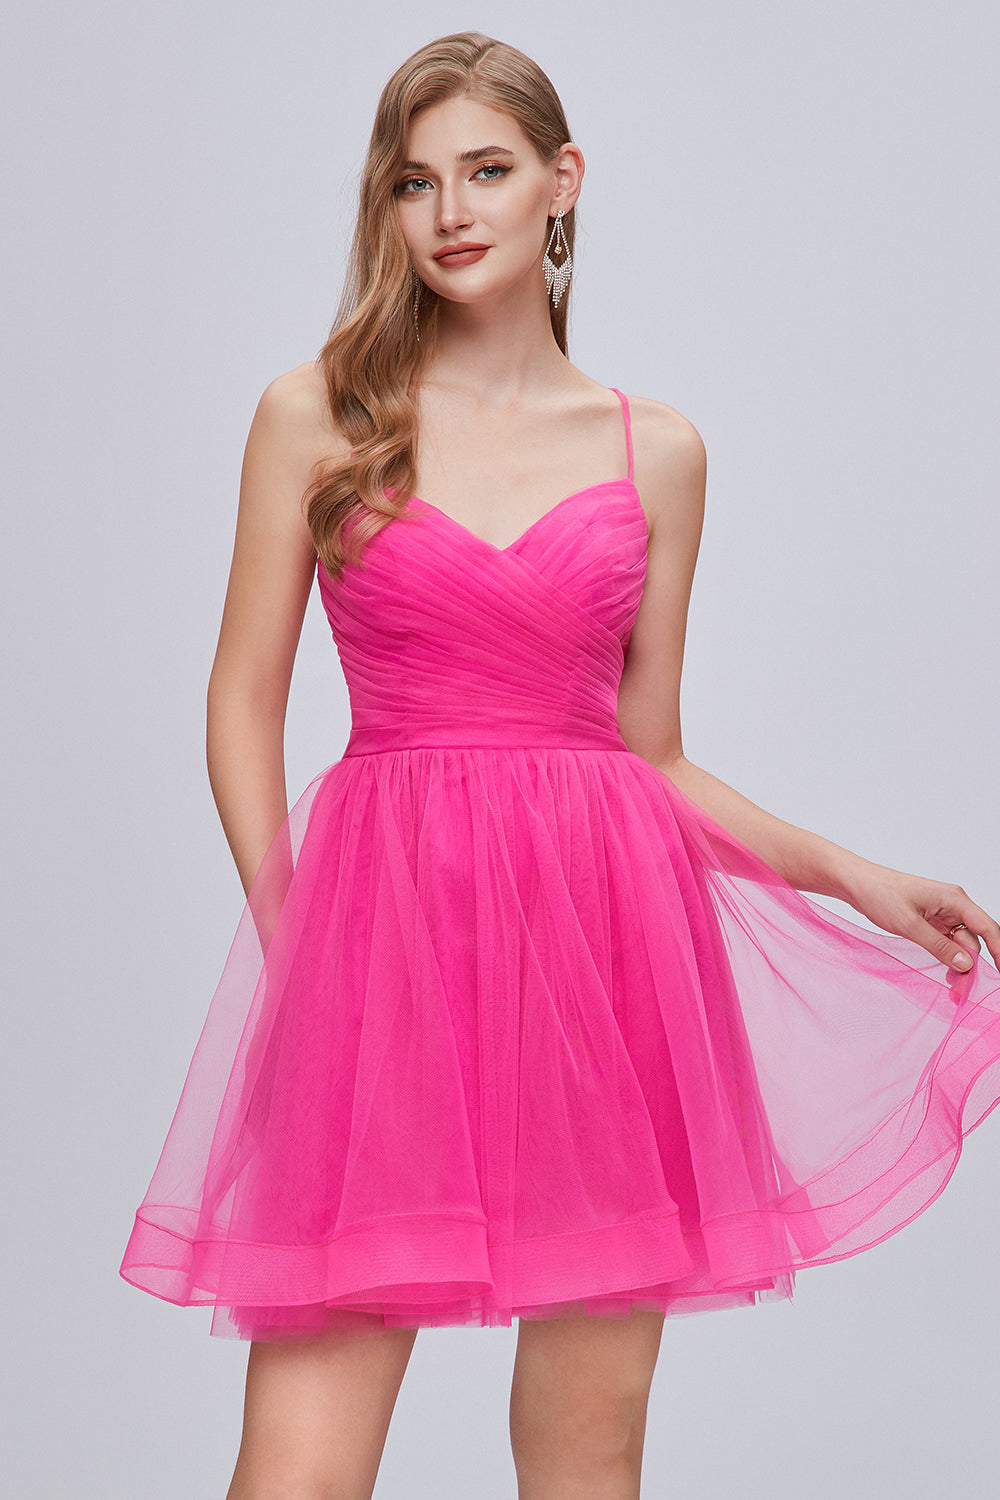 Cute Pink Spaghetti Strap V Neck Tulle Homecoming Dresses